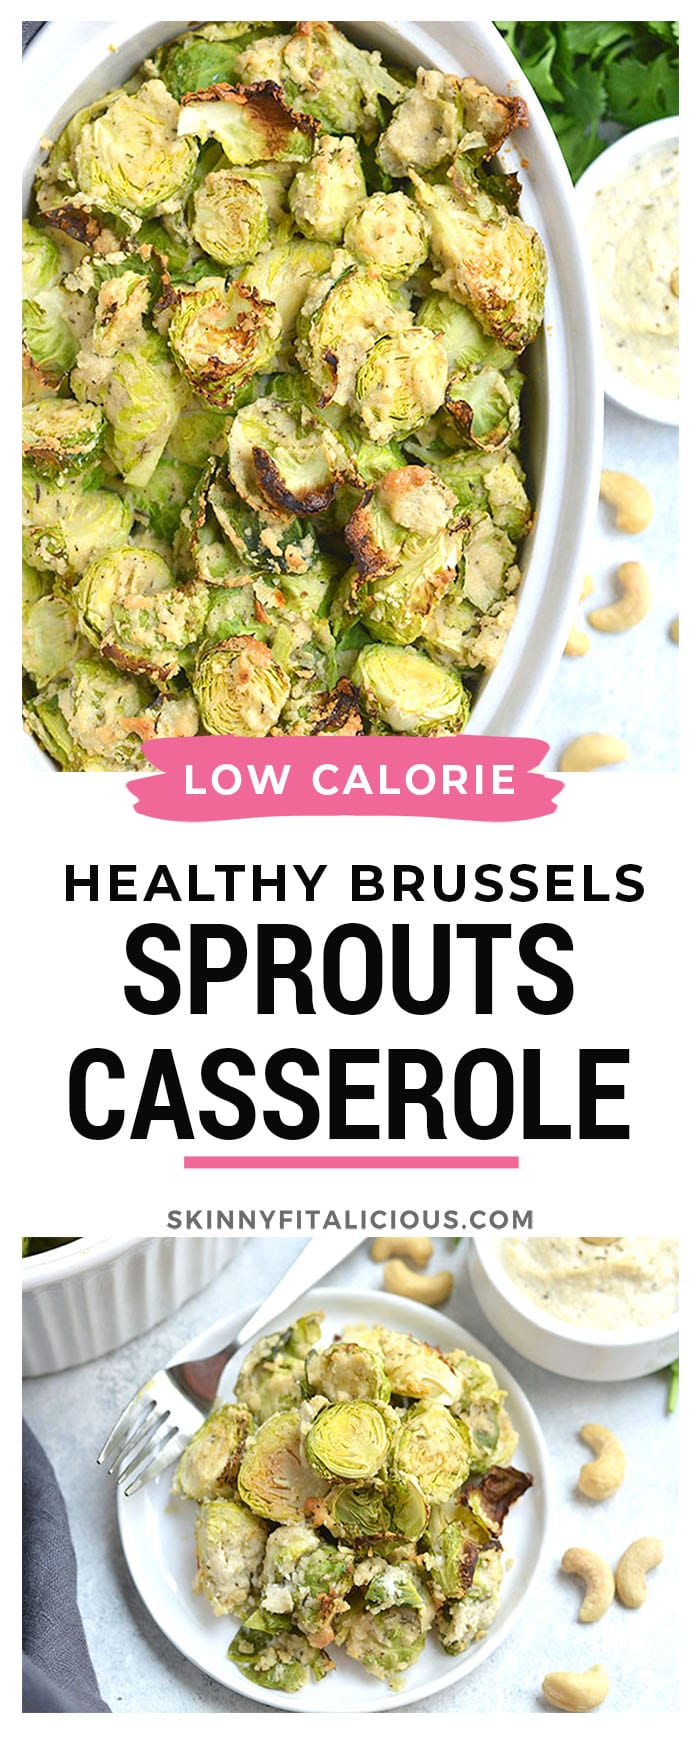 Crispy Brussels Sprouts With Cashew Cream Sauce! Roasted Brussels sprouts tossed in a Vegan creamy cashew sauce. A healthy spin on Brussels sprouts gratin that's dairy-free and delicious. A healthy side dish to add to any meal.